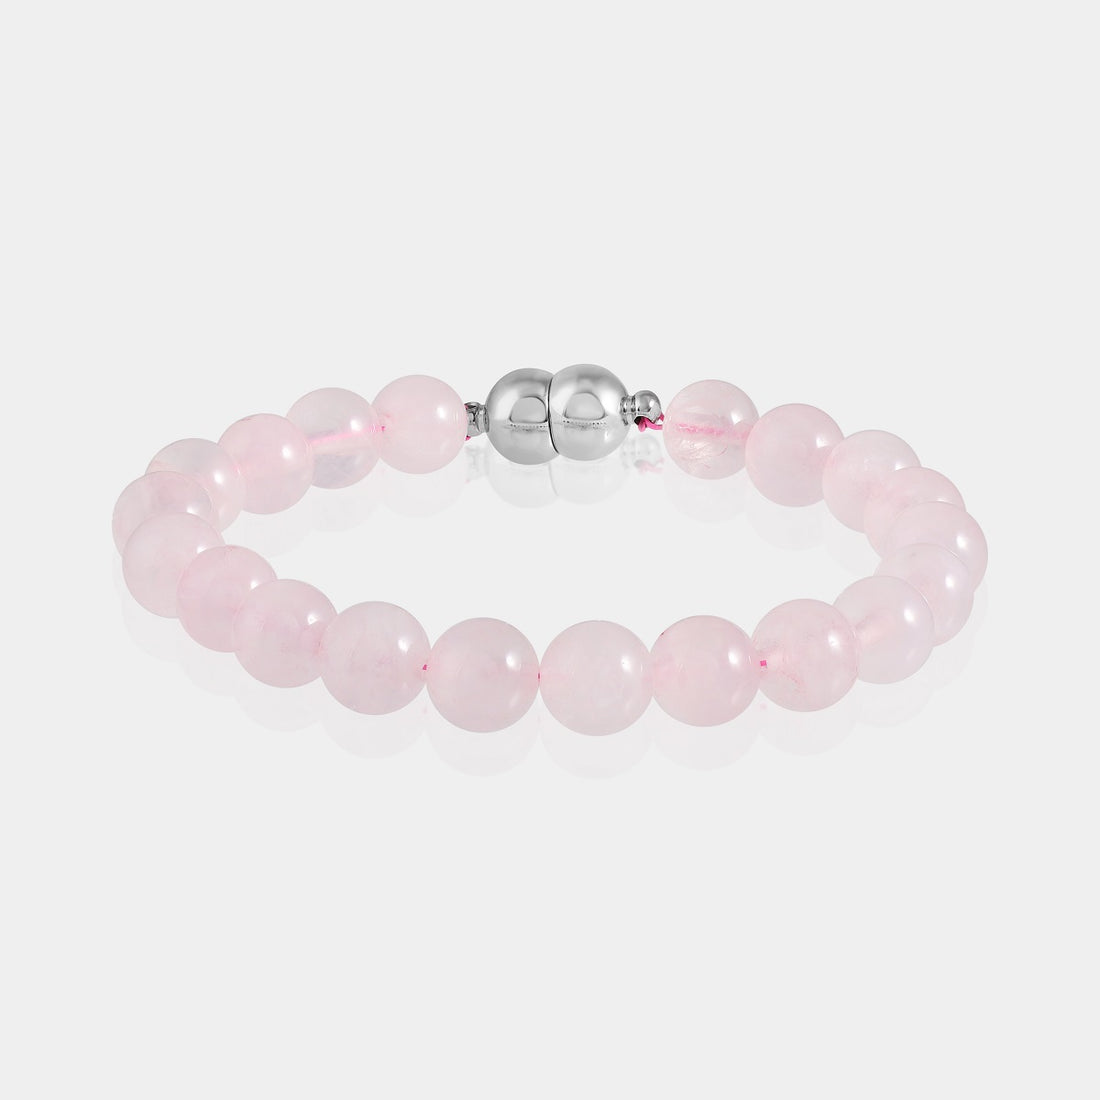 8mm smooth round Rose Quartz beads, radiating a gentle and soothing pink color